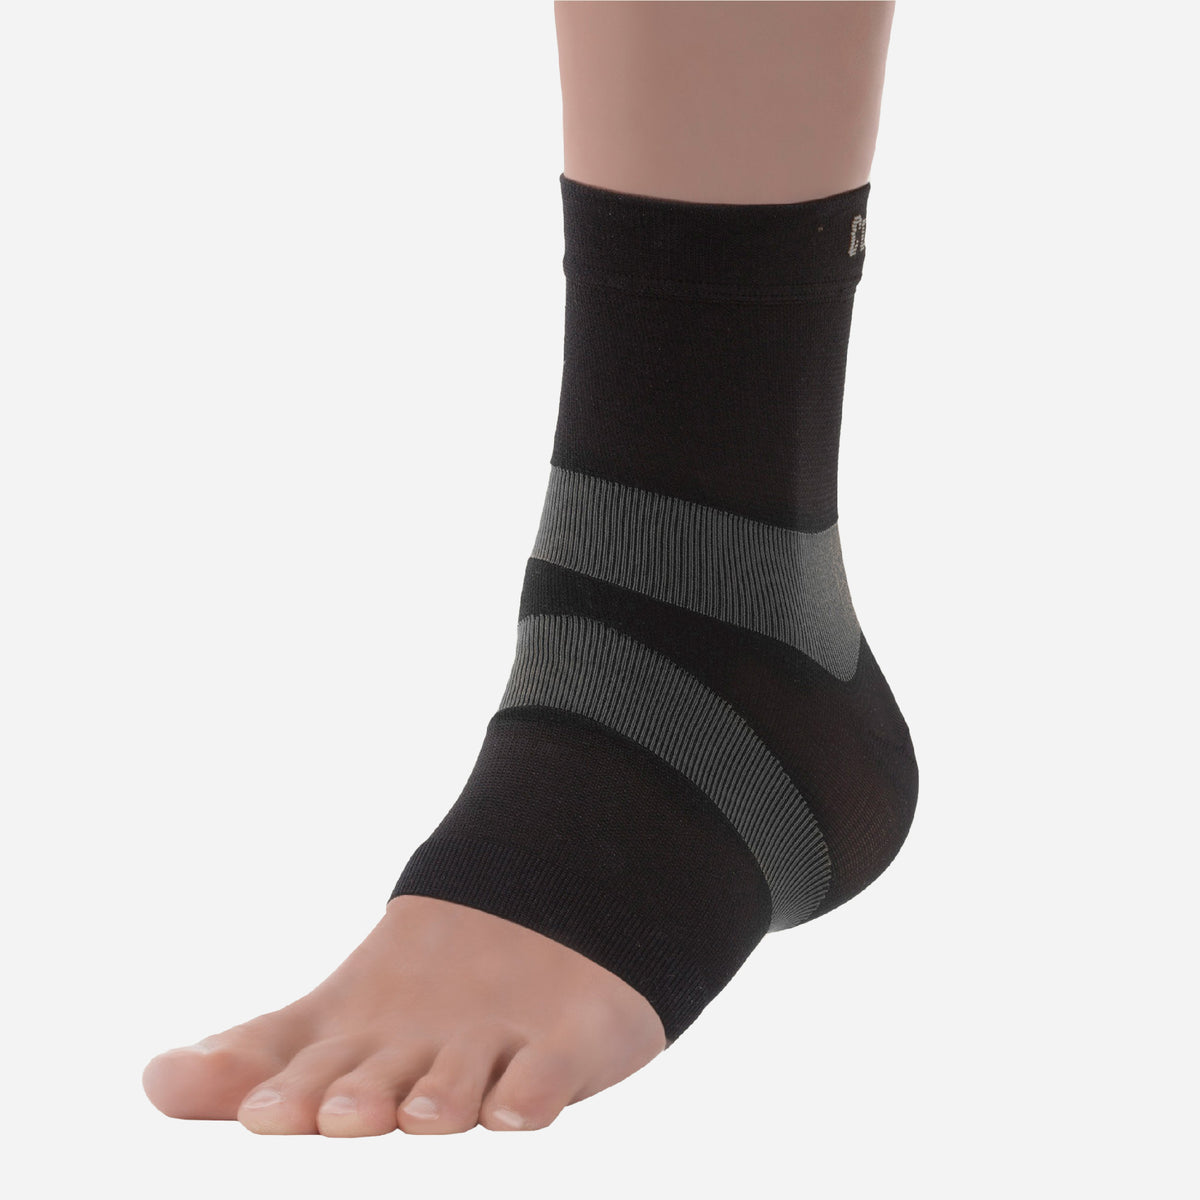 Tommie Copper Sport Compression Ankle Sleeve, Black, Small/Medium, Support  Brace, 1 Count per Pack